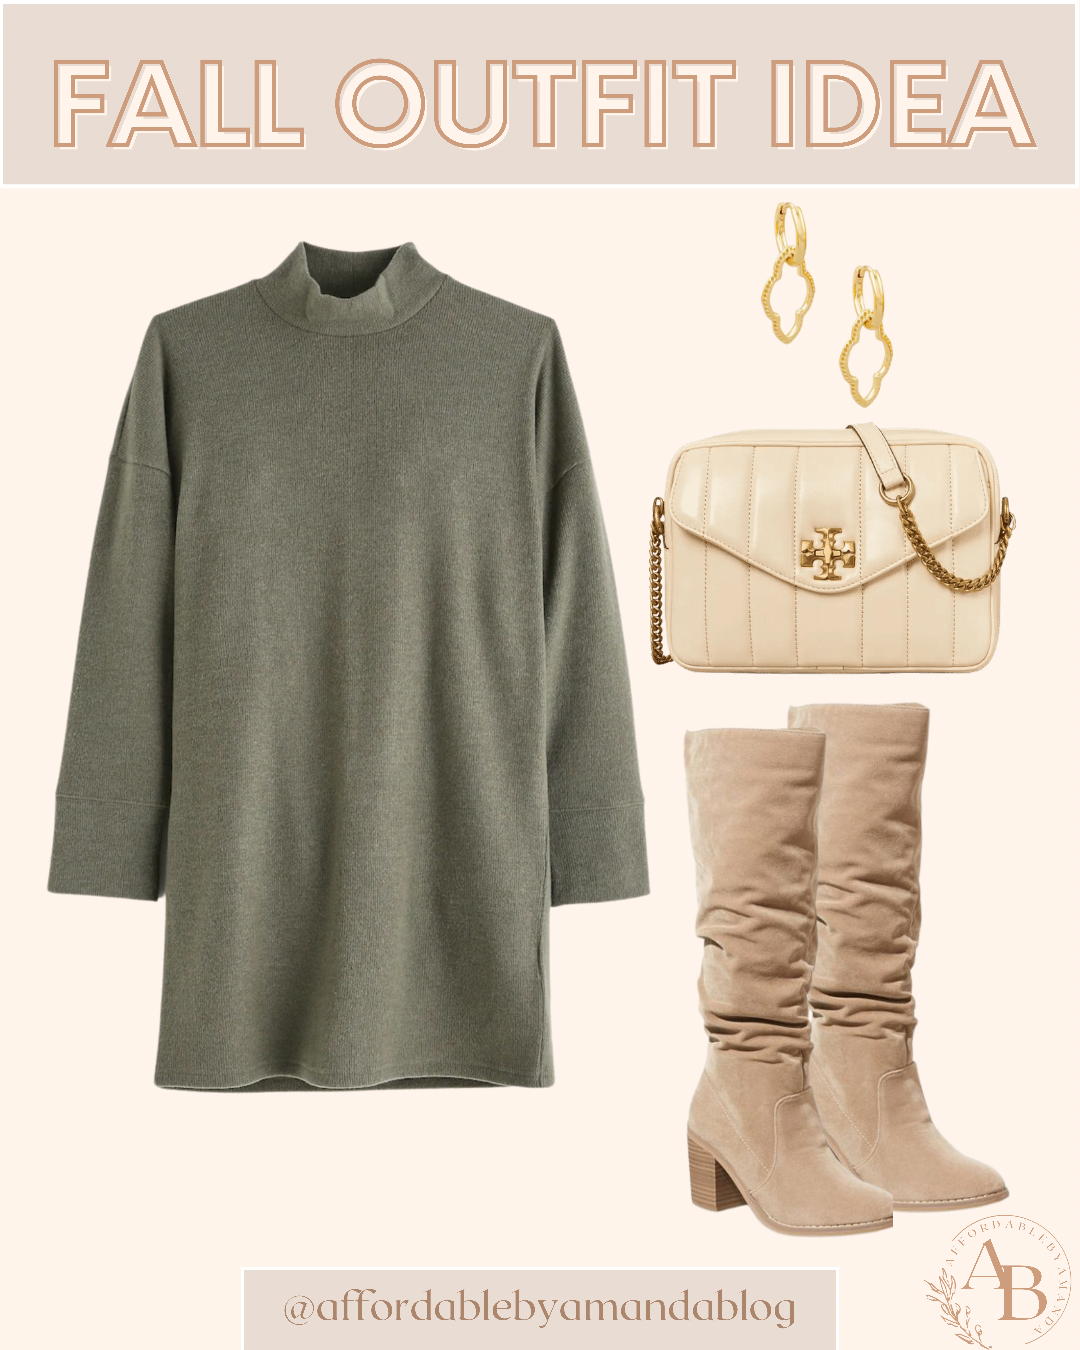 7 Trendy Fall Outfit Ideas - Affordable by Amanda